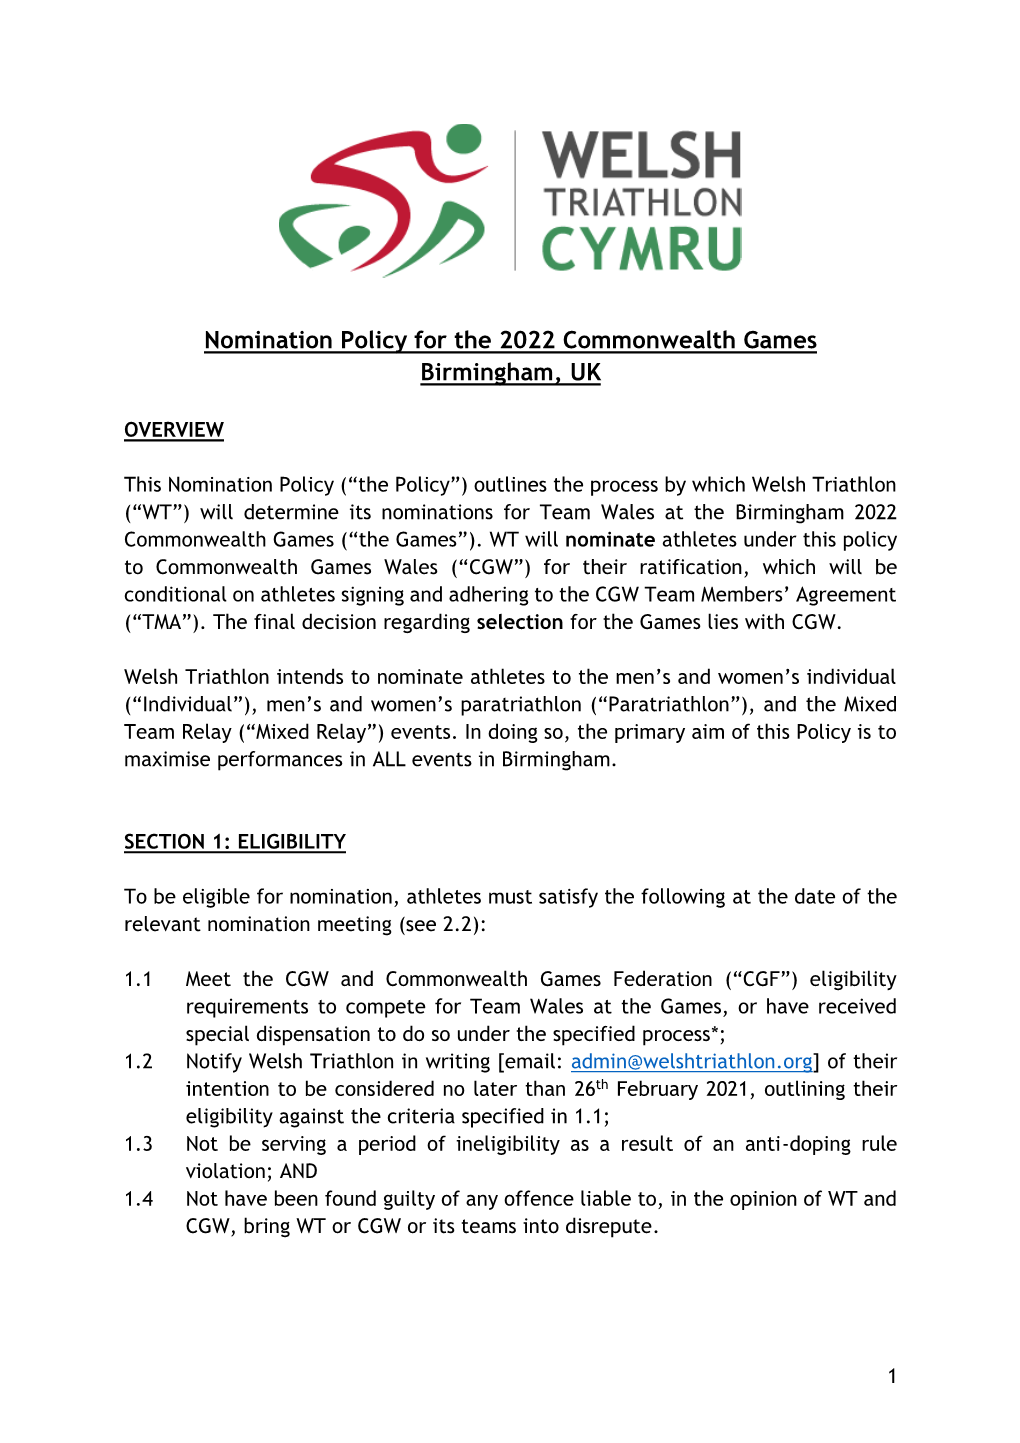 Nomination Policy for the 2022 Commonwealth Games Birmingham, UK